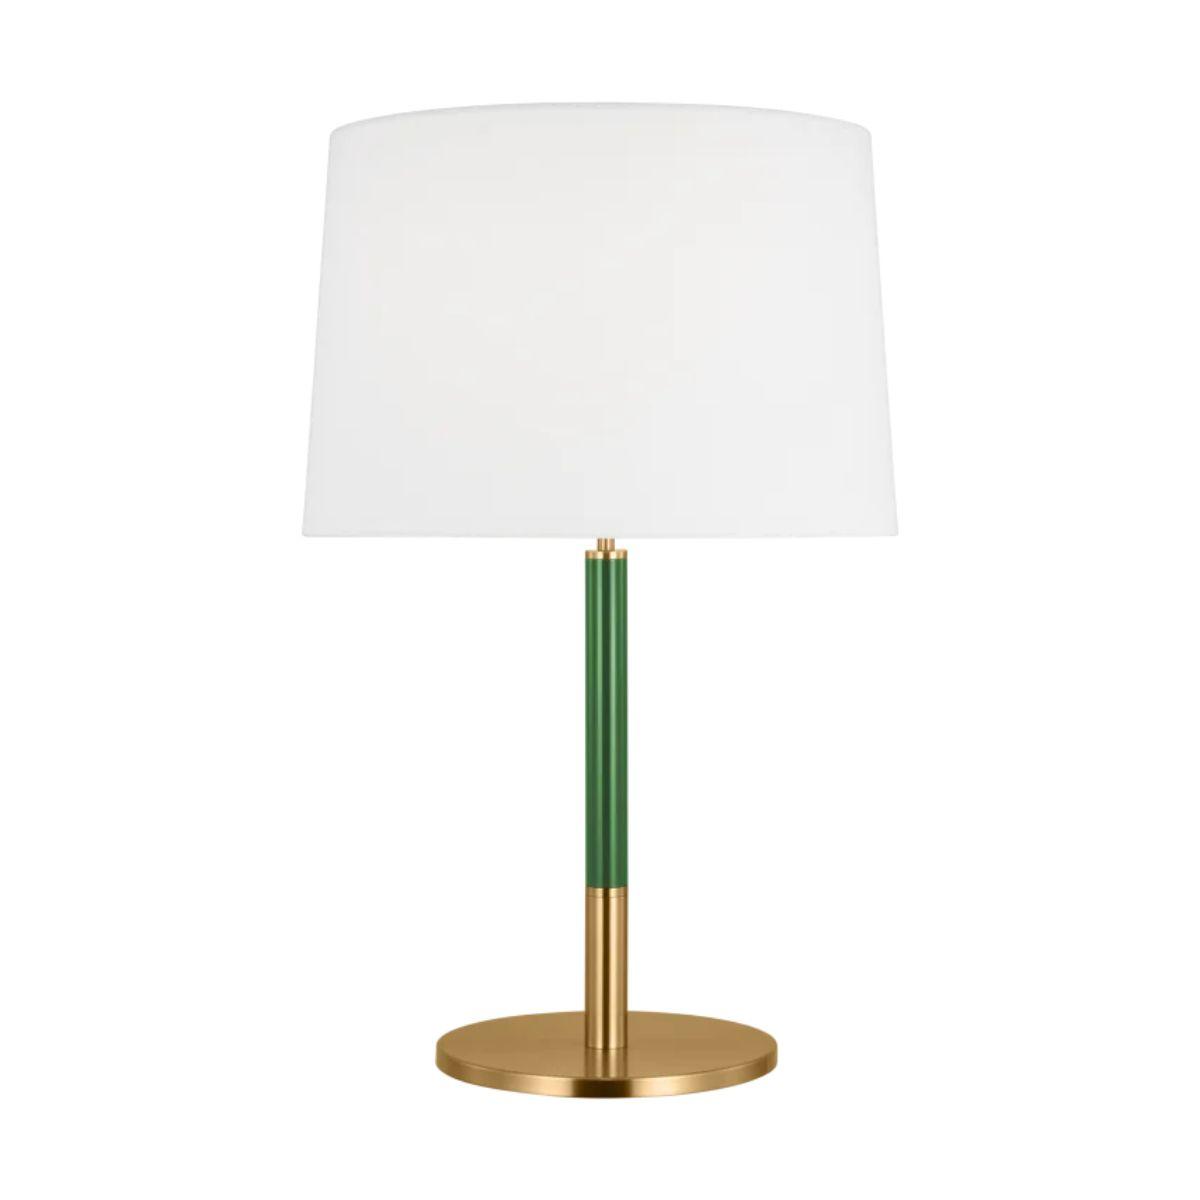 Monroe Medium Table Lamp Burnished Brass with Green Accents